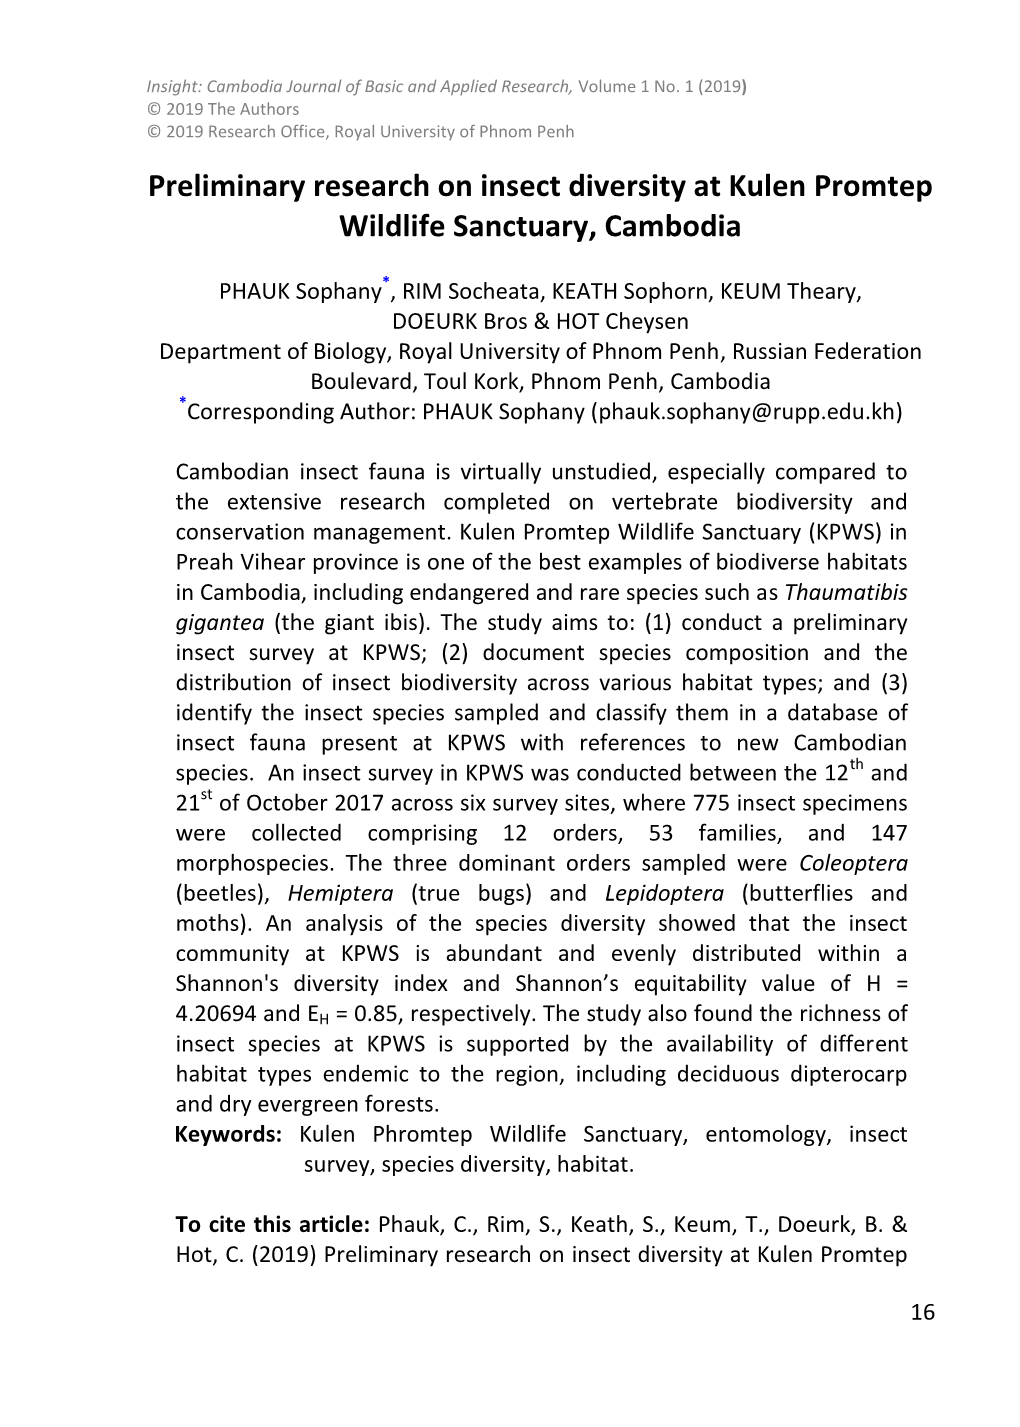 Preliminary Research on Insect Diversity at Kulen Promtep Wildlife Sanctuary, Cambodia